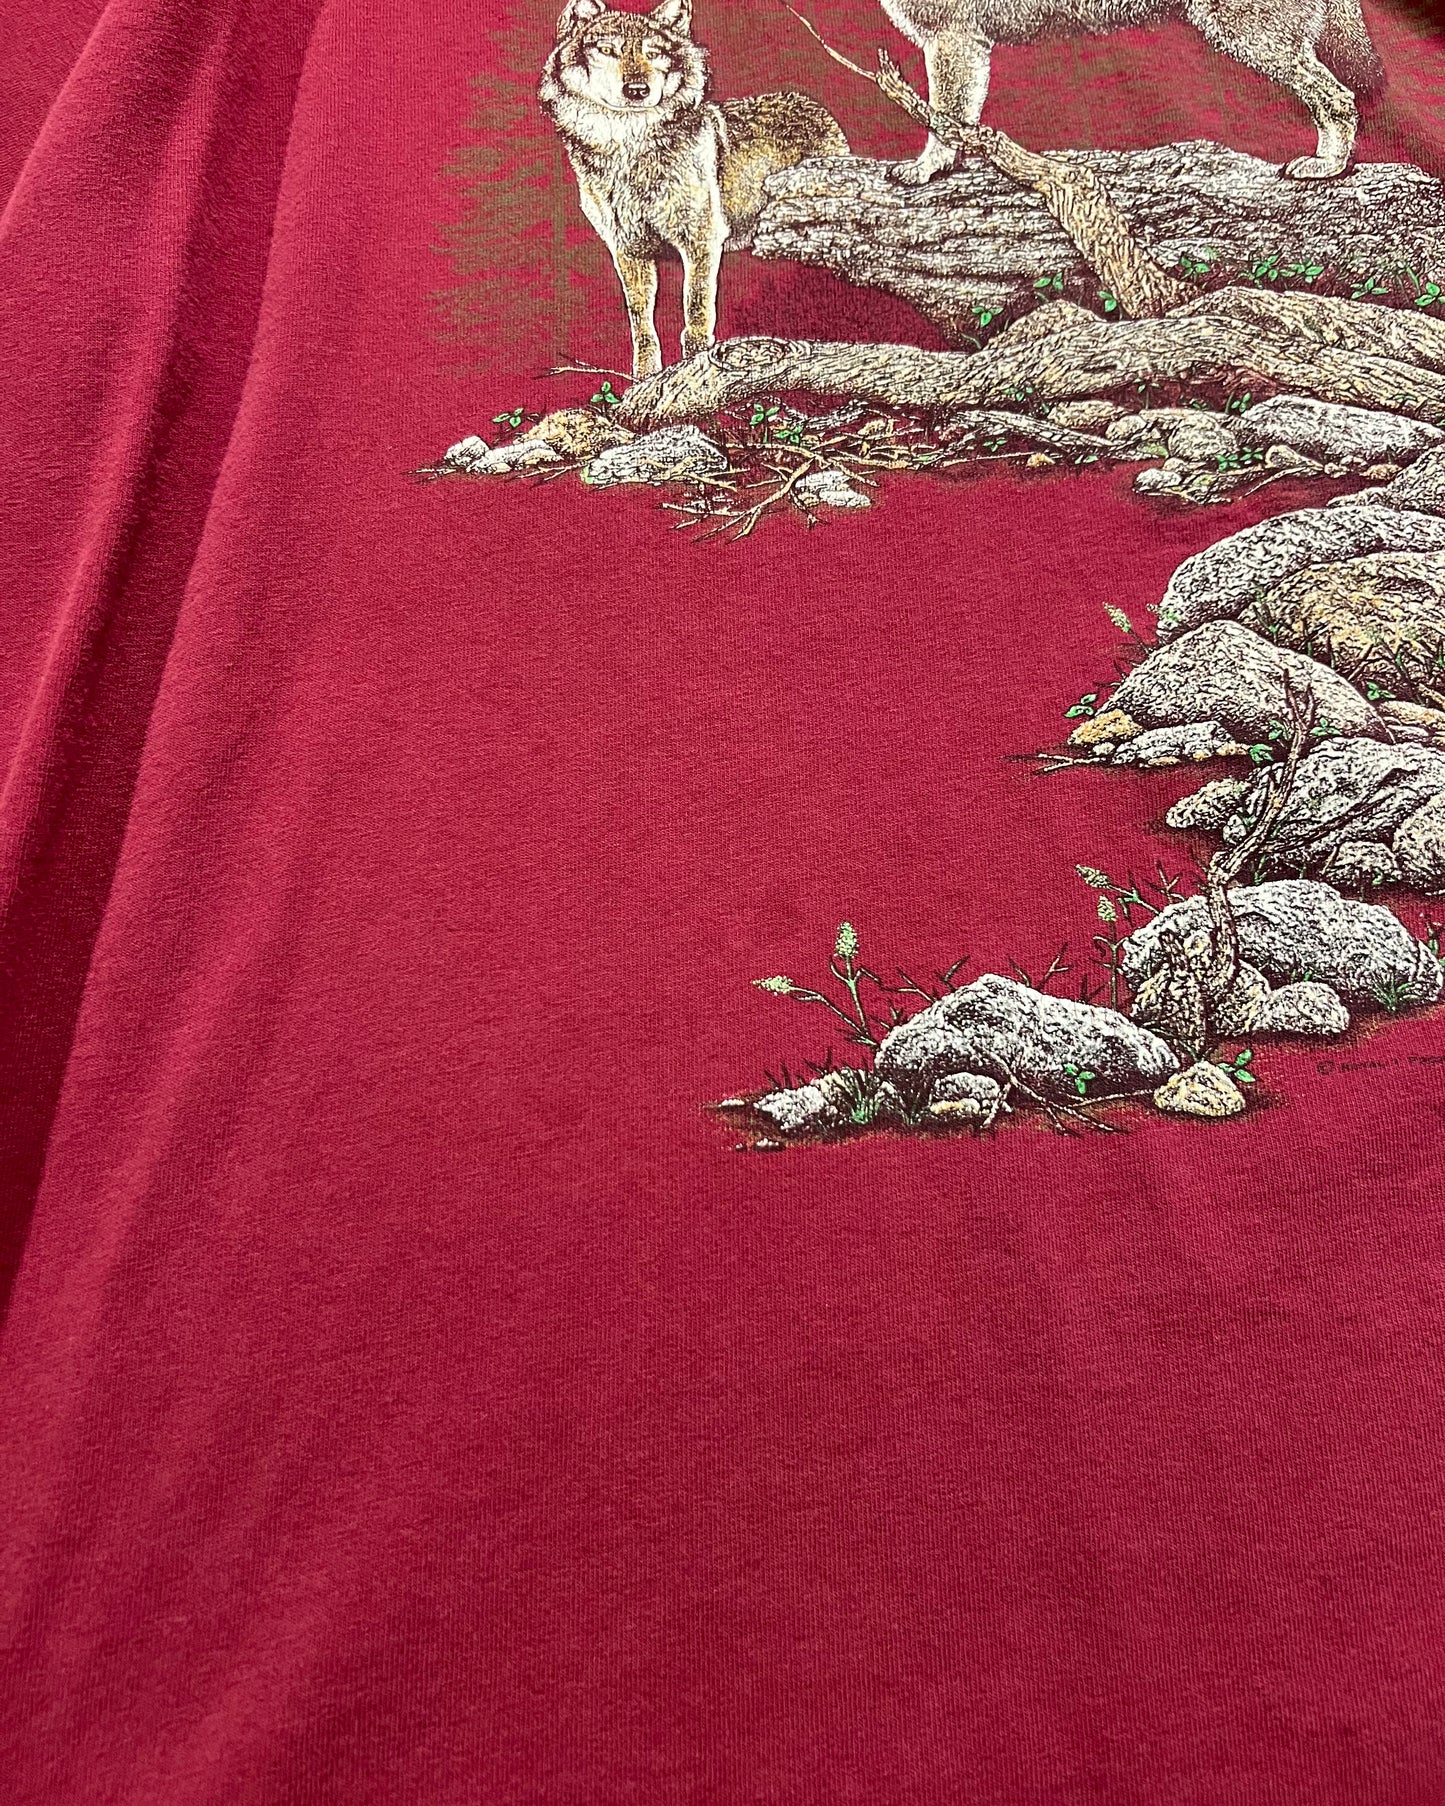 1990's Faded American Outdoors Wolf Pack T-Shirt